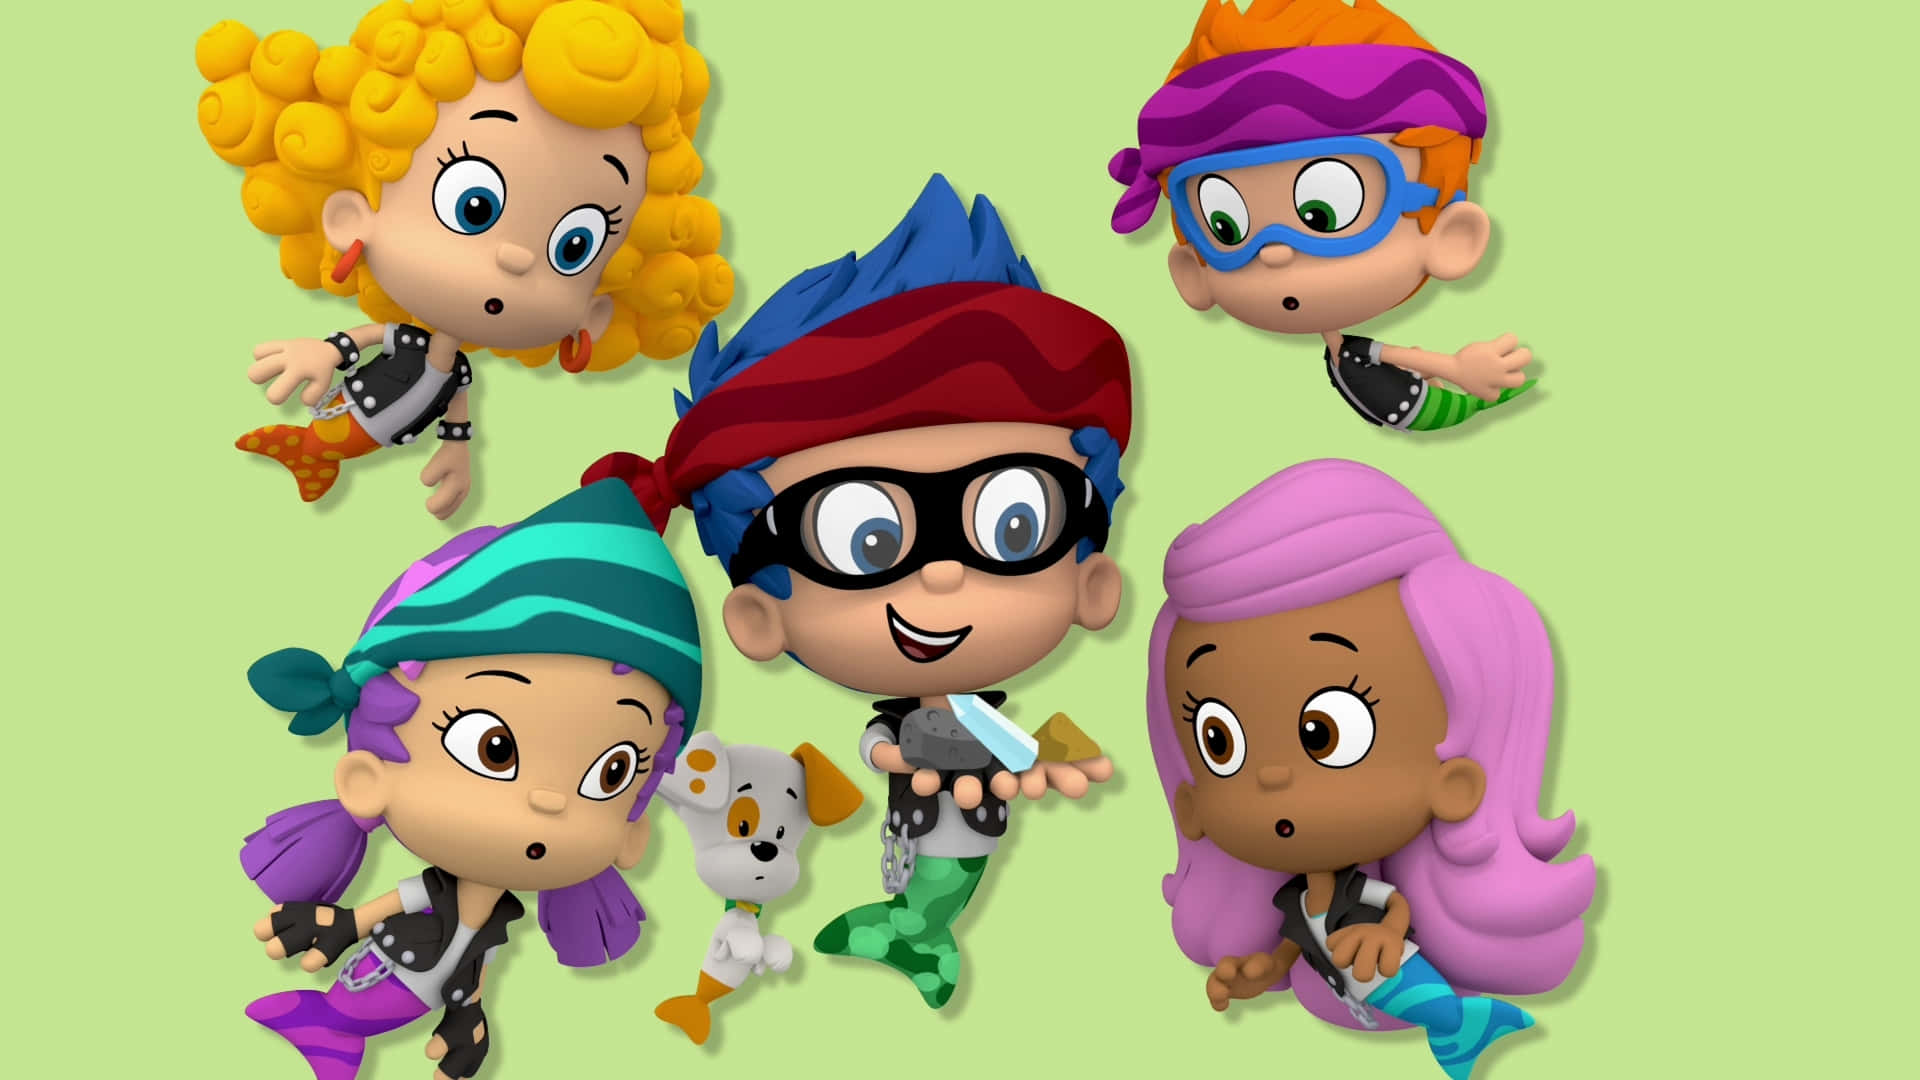 Join Molly, Gil and the Bubble Guppies gang for fun and adventure!